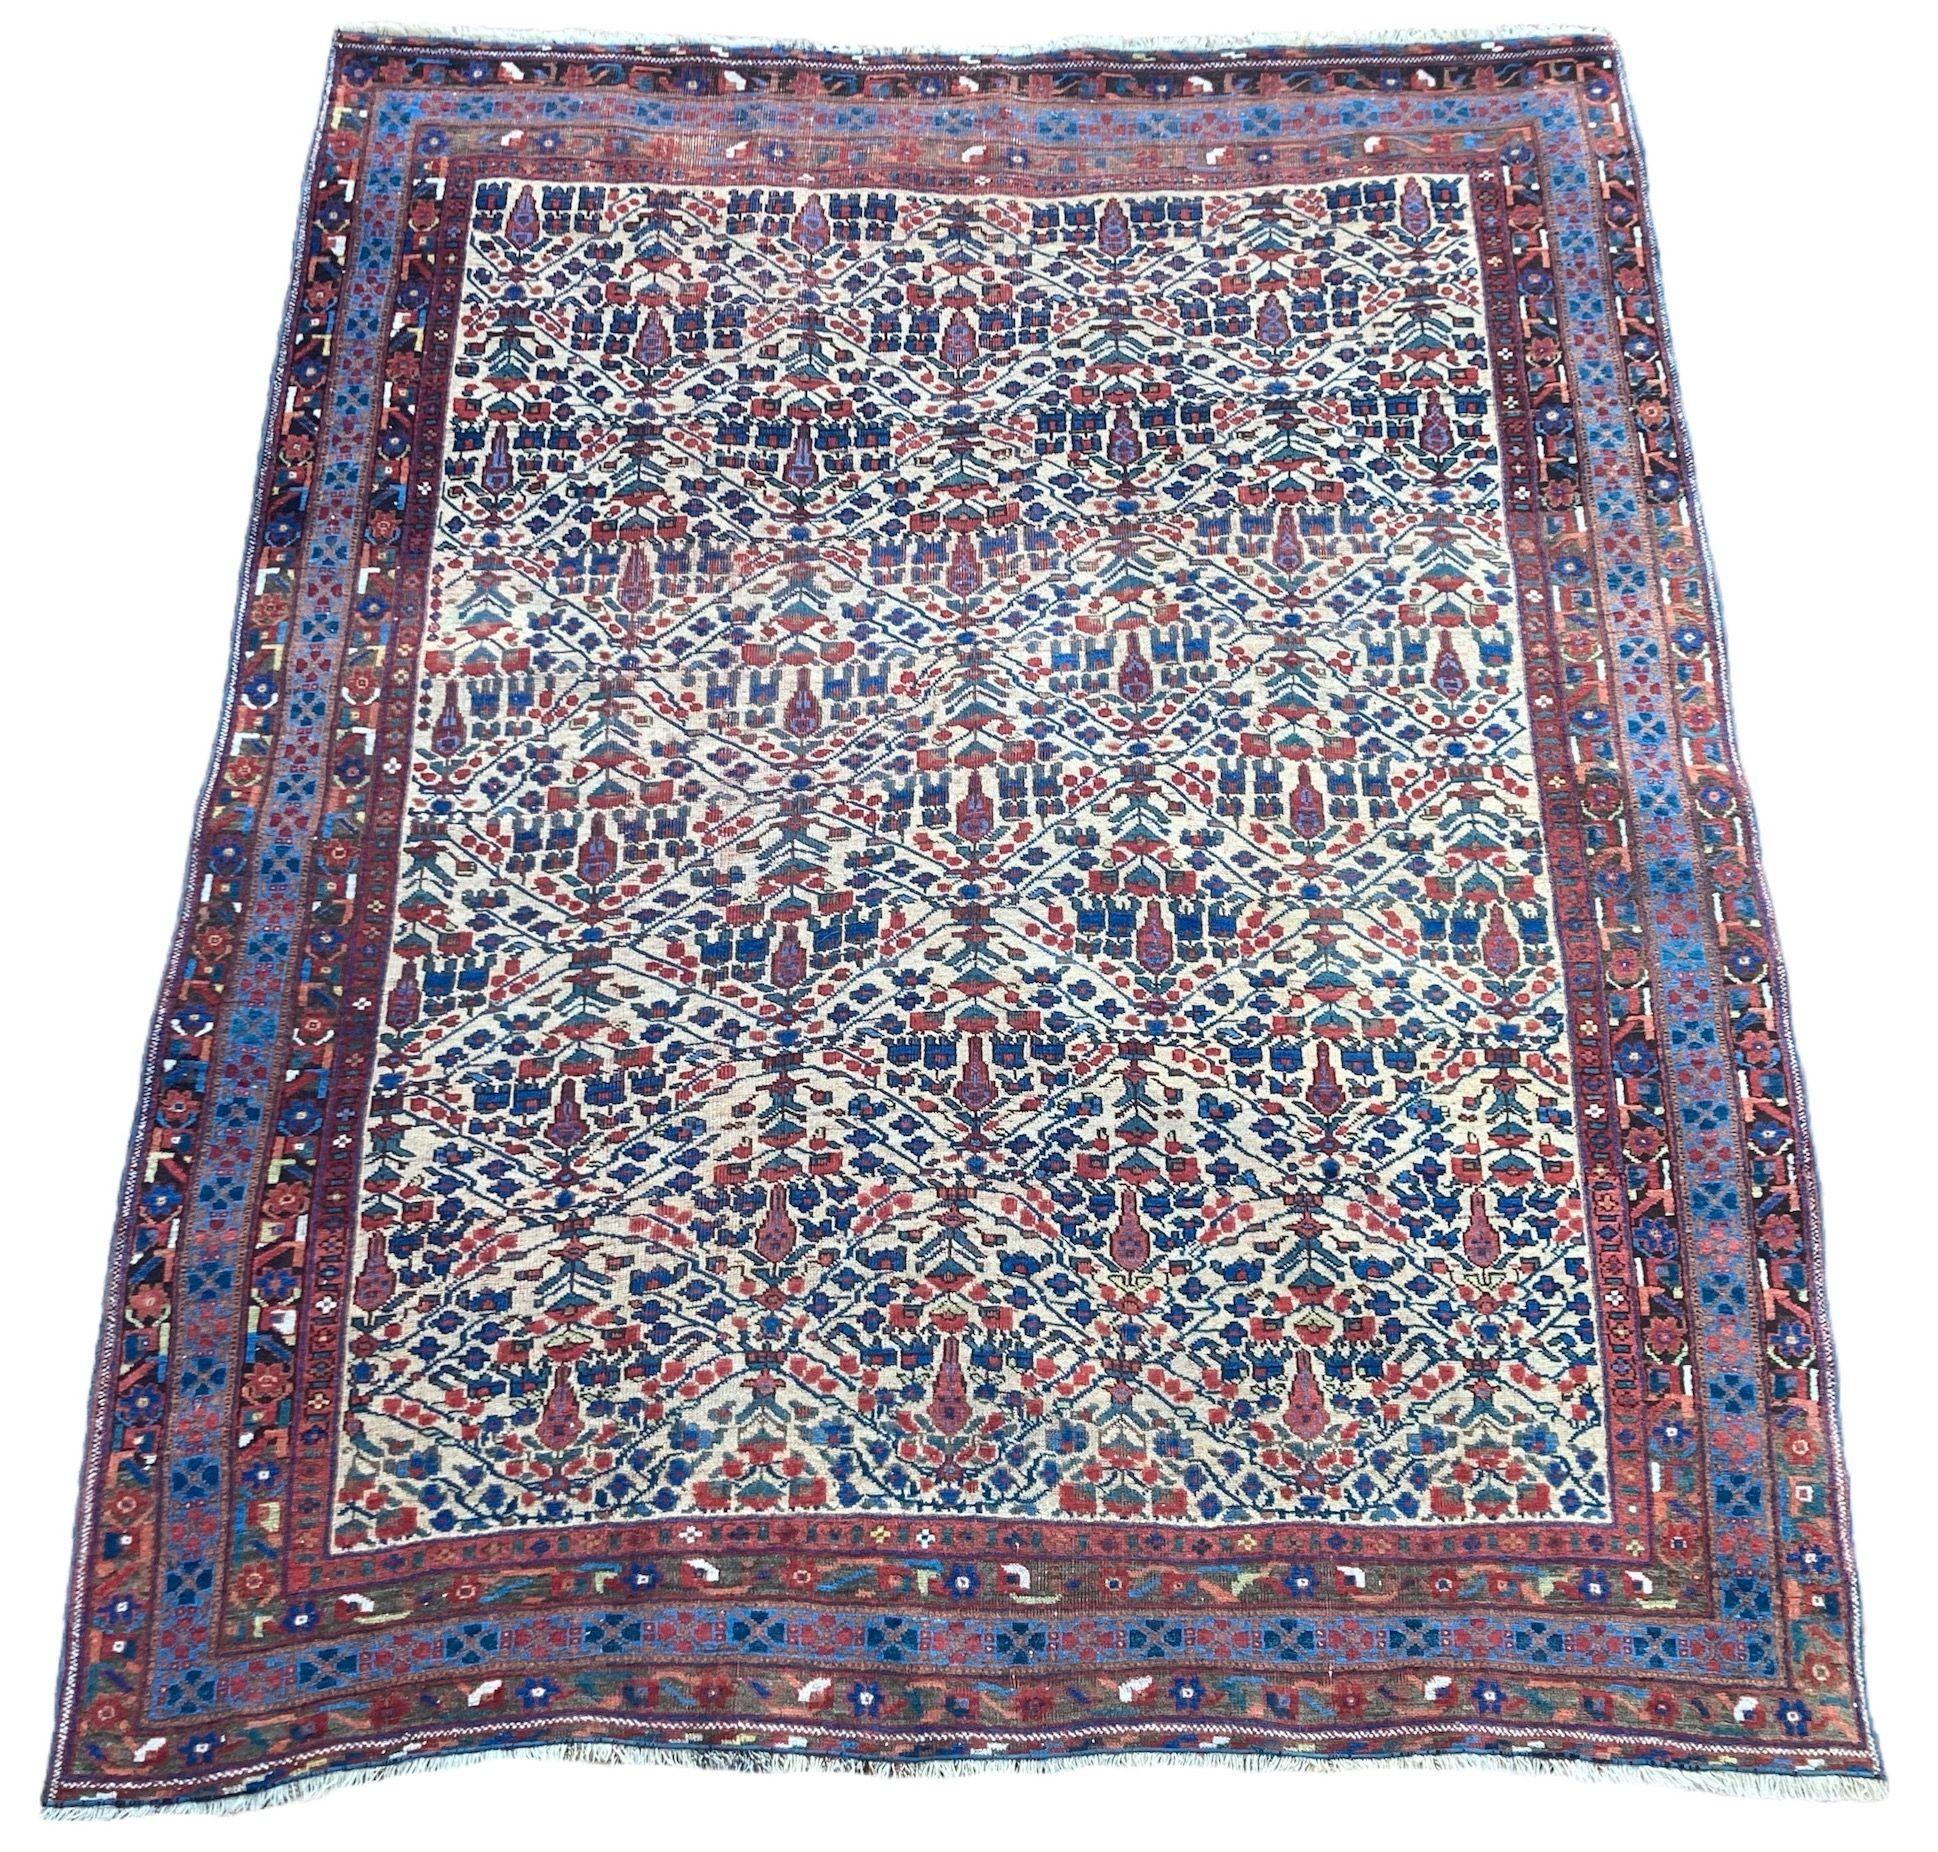 A beautiful antique Afshar rug, handwoven circa 1900 with an all over geometrical design of shrubs and flowers on an ivory field and light indigo border. A great example of tribal weaving and a very decorative rug.
Size: 1.90m x 1.56m (6ft 3in x 5ft